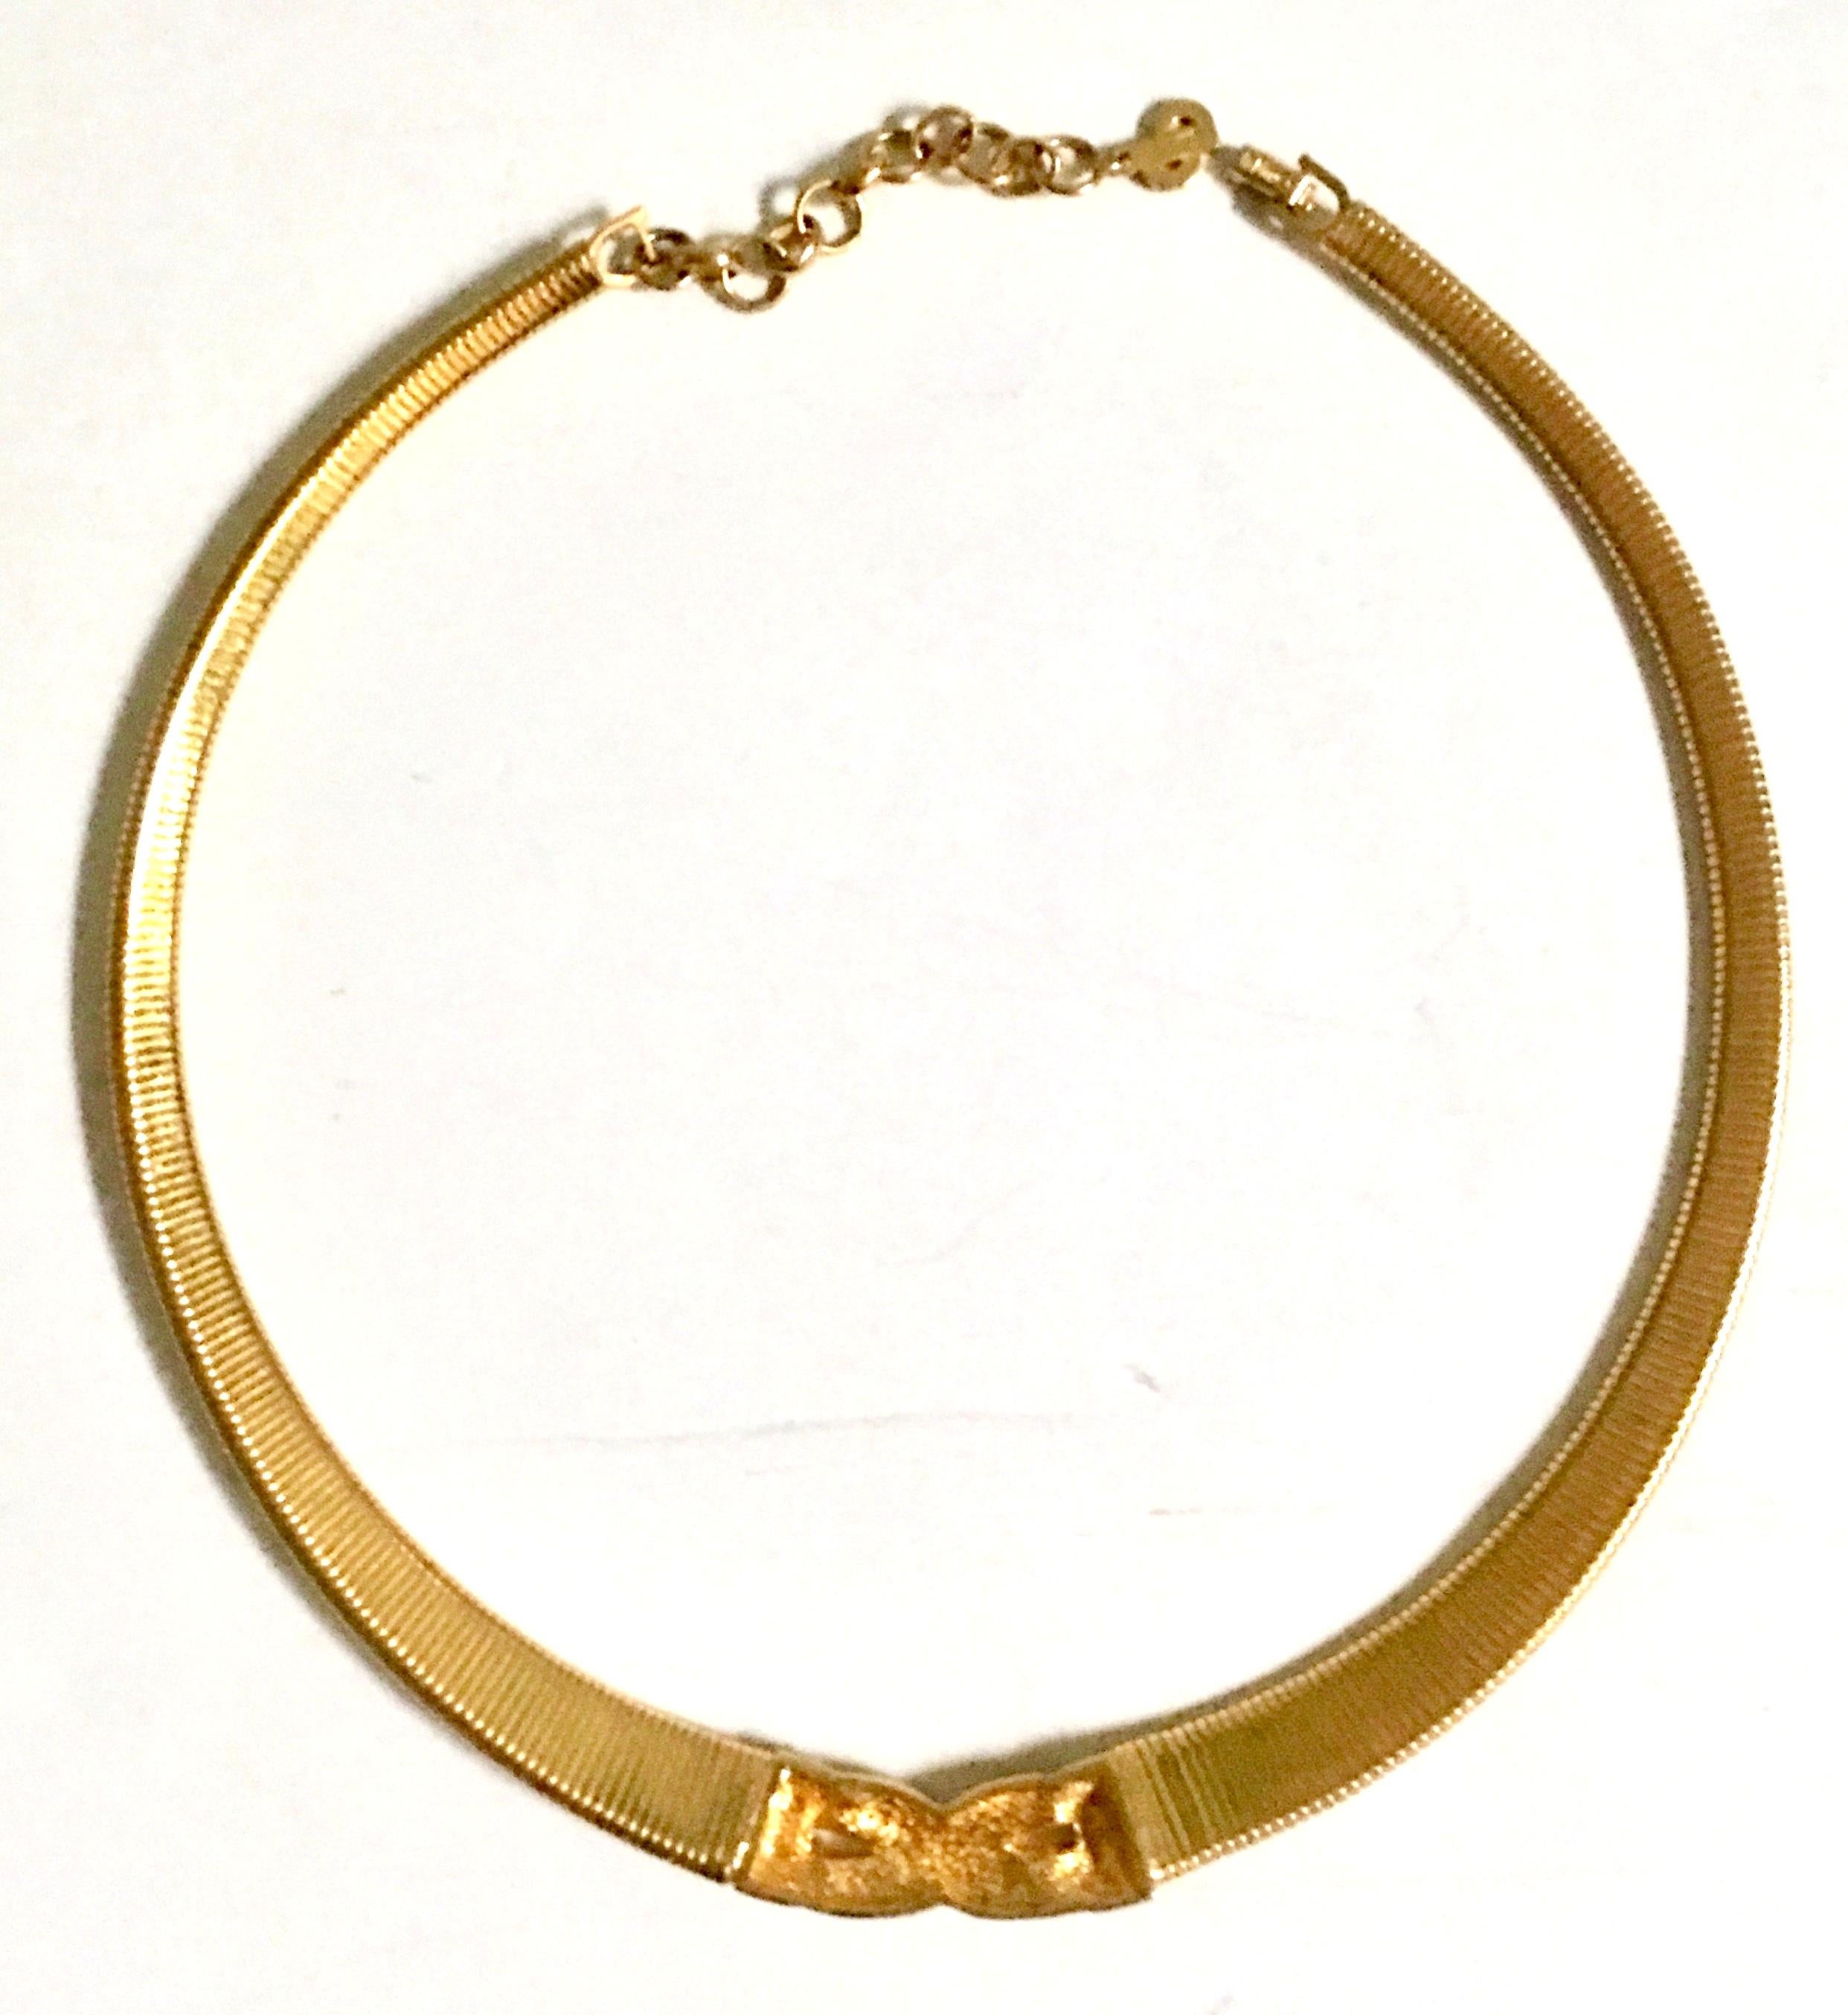 20th Century Gold & Swarovski Crystal Necklace By, Christian Dior For Sale 2